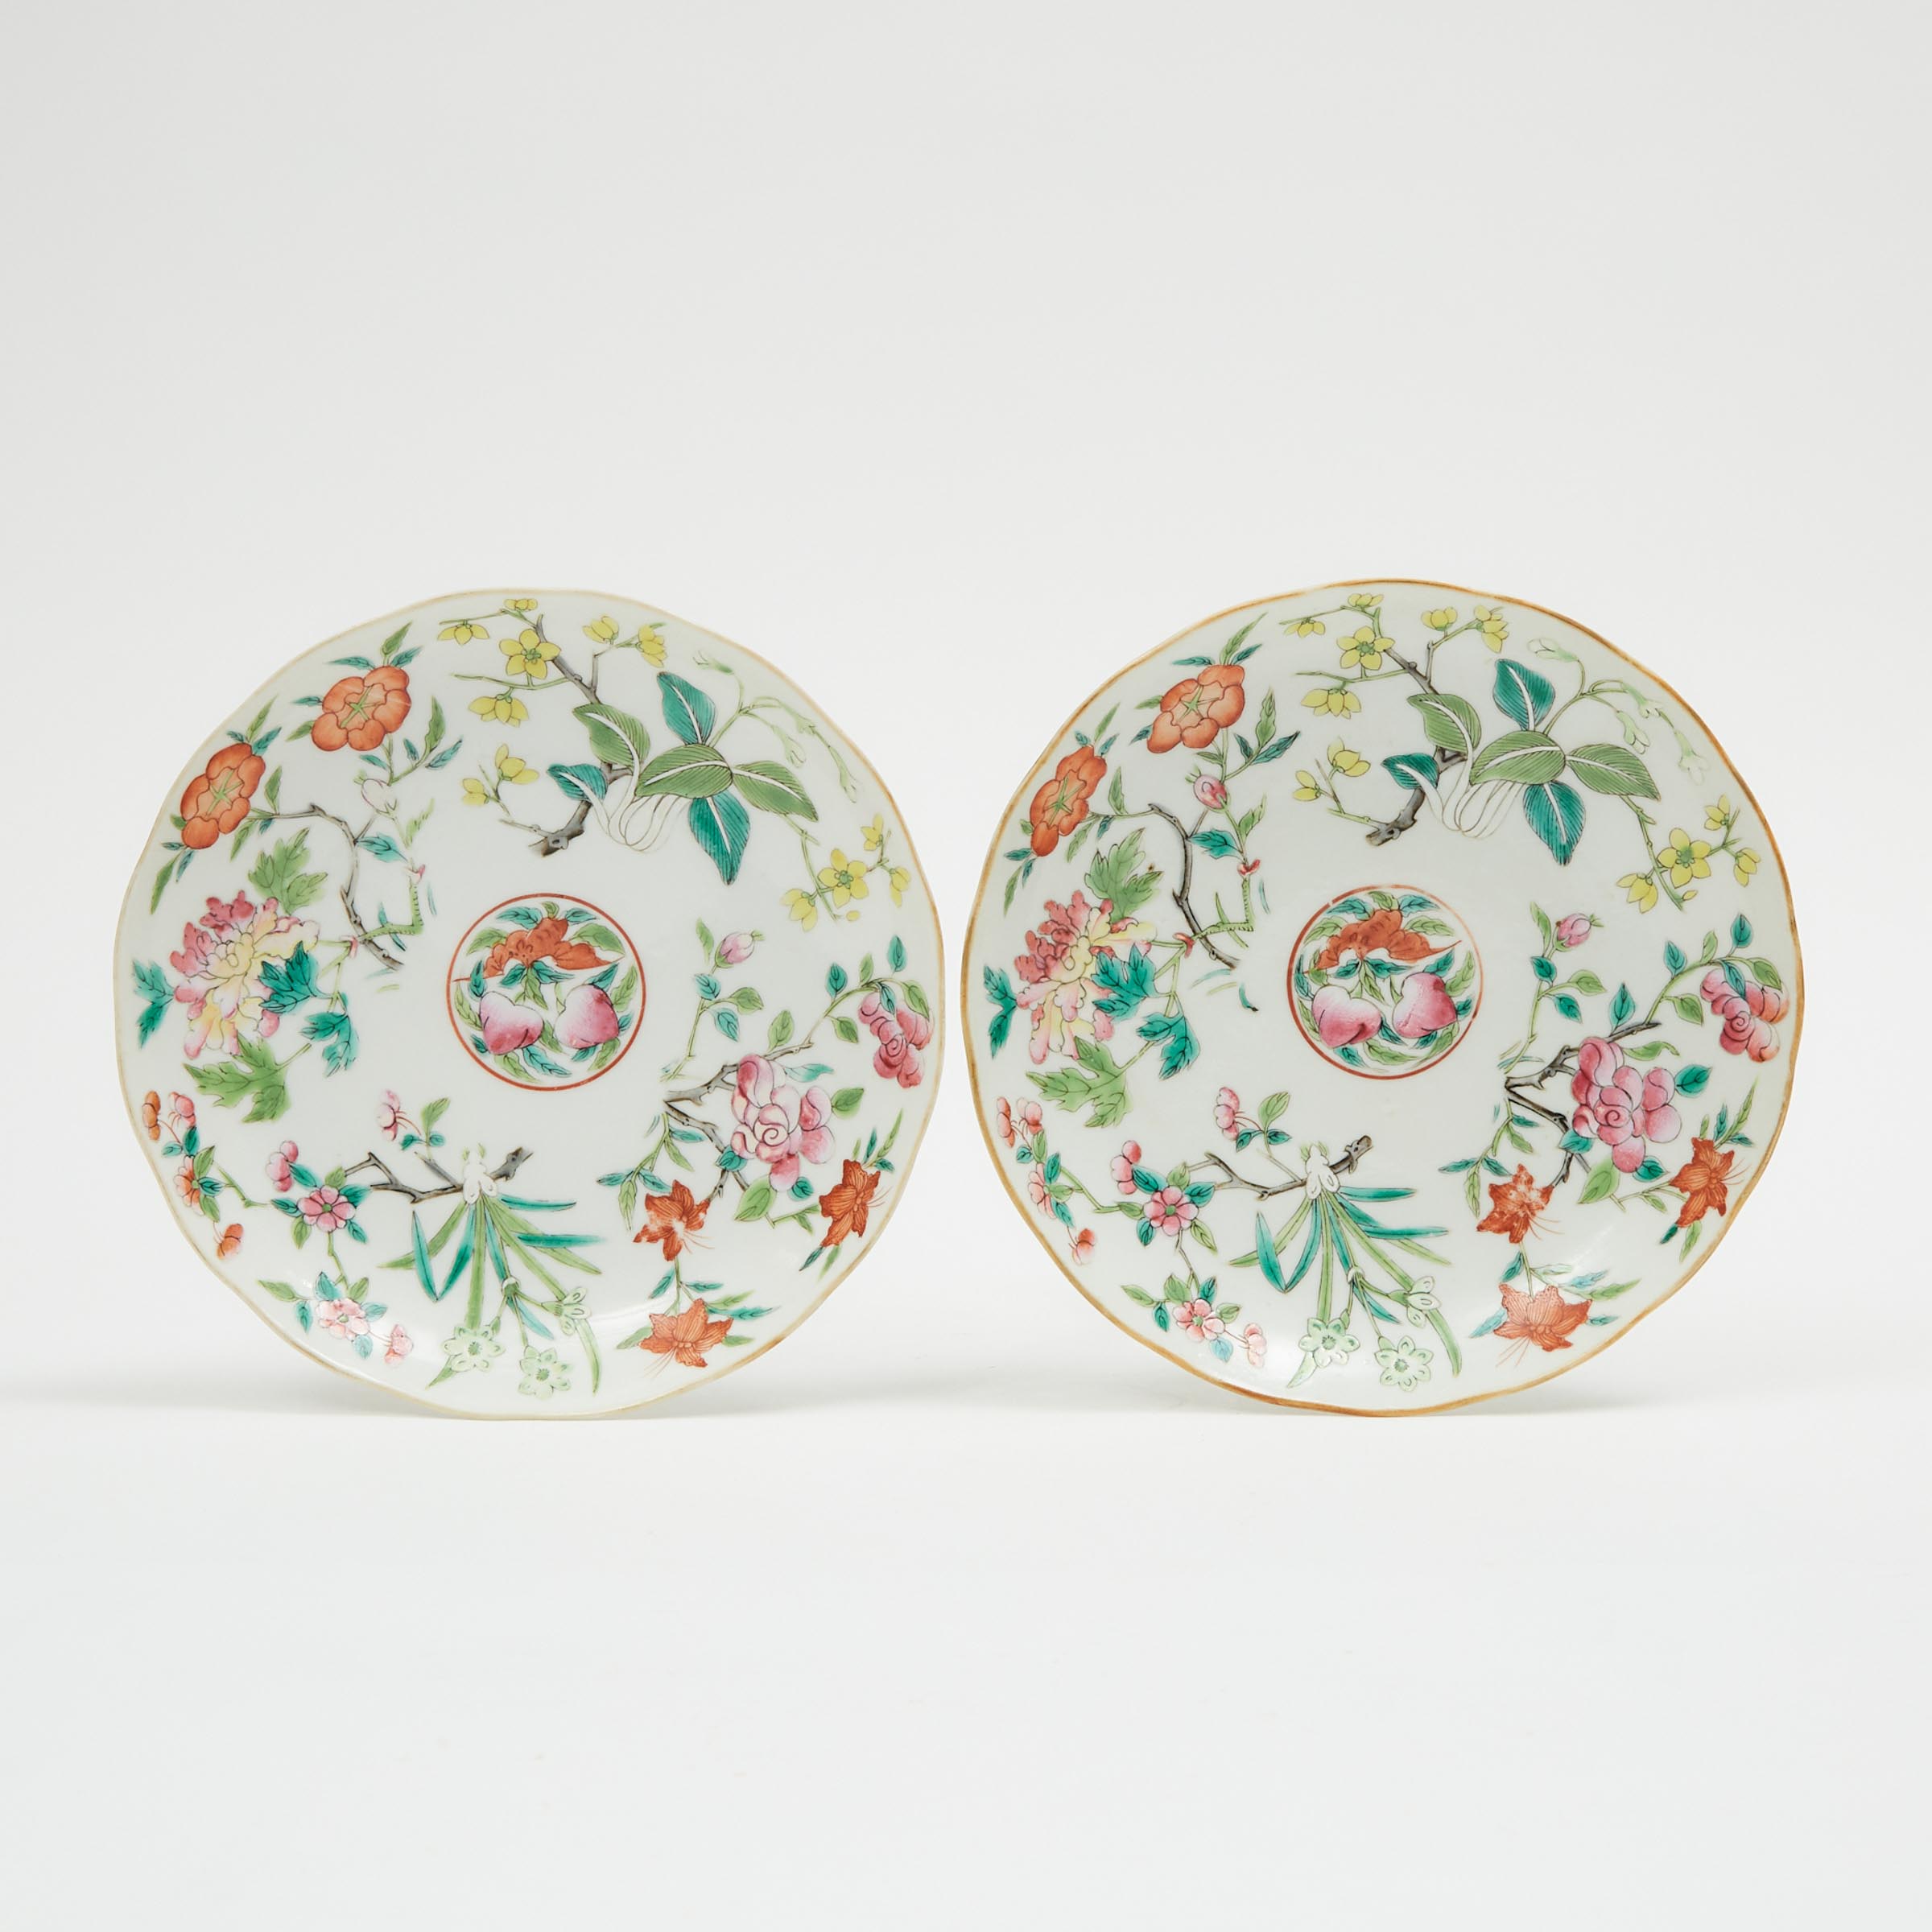 A Pair of Famille Rose Dishes, Daoguang Mark